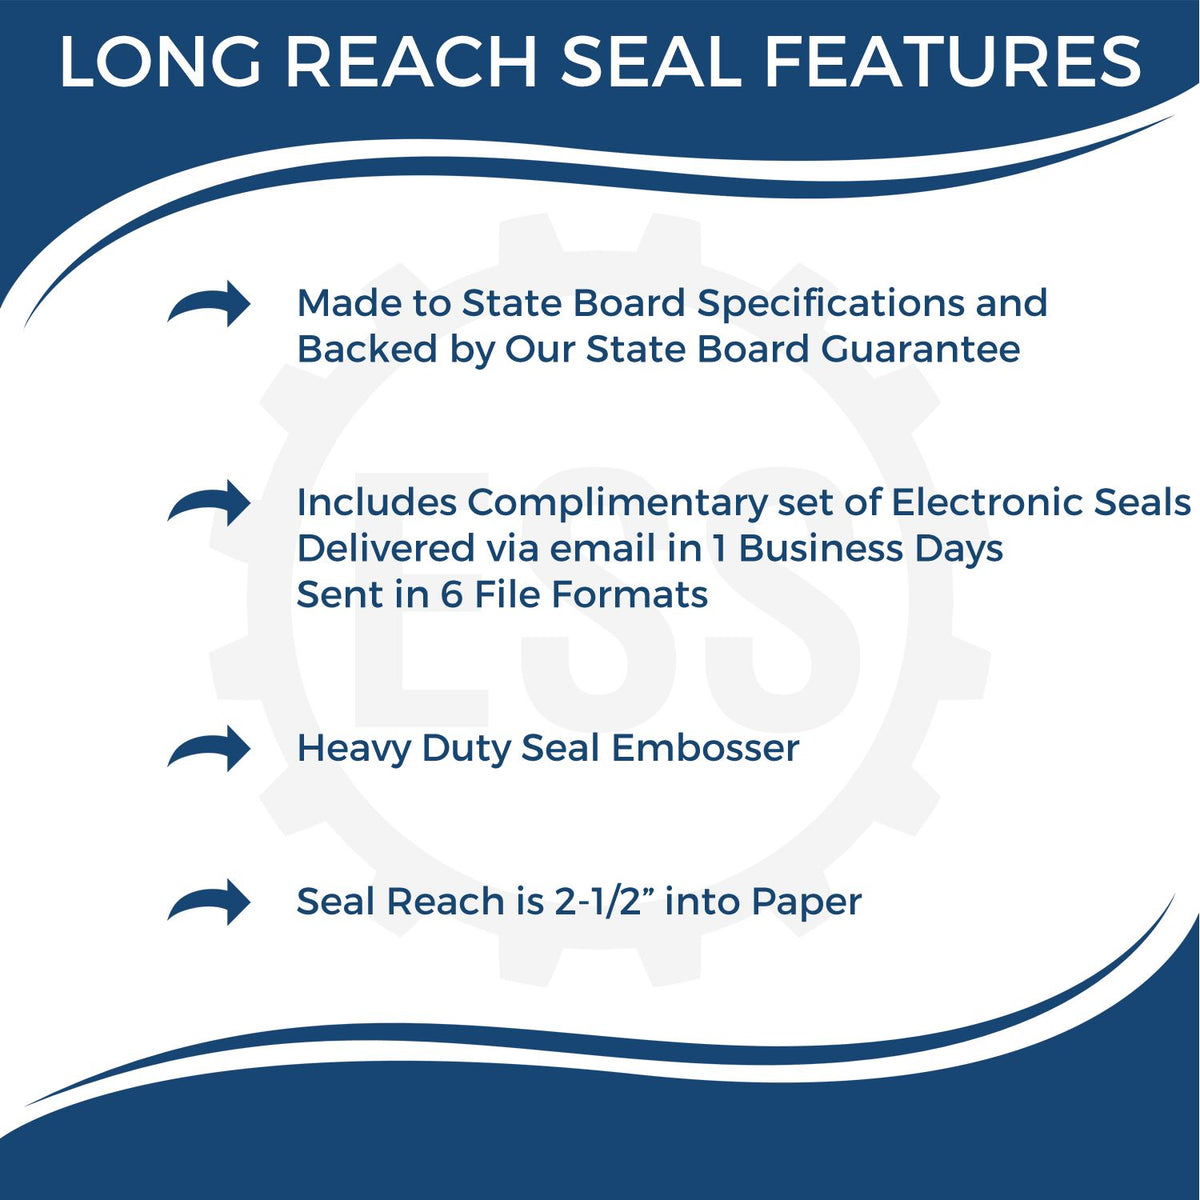 A picture of an infographic highlighting the selling points for the Long Reach Iowa Geology Seal